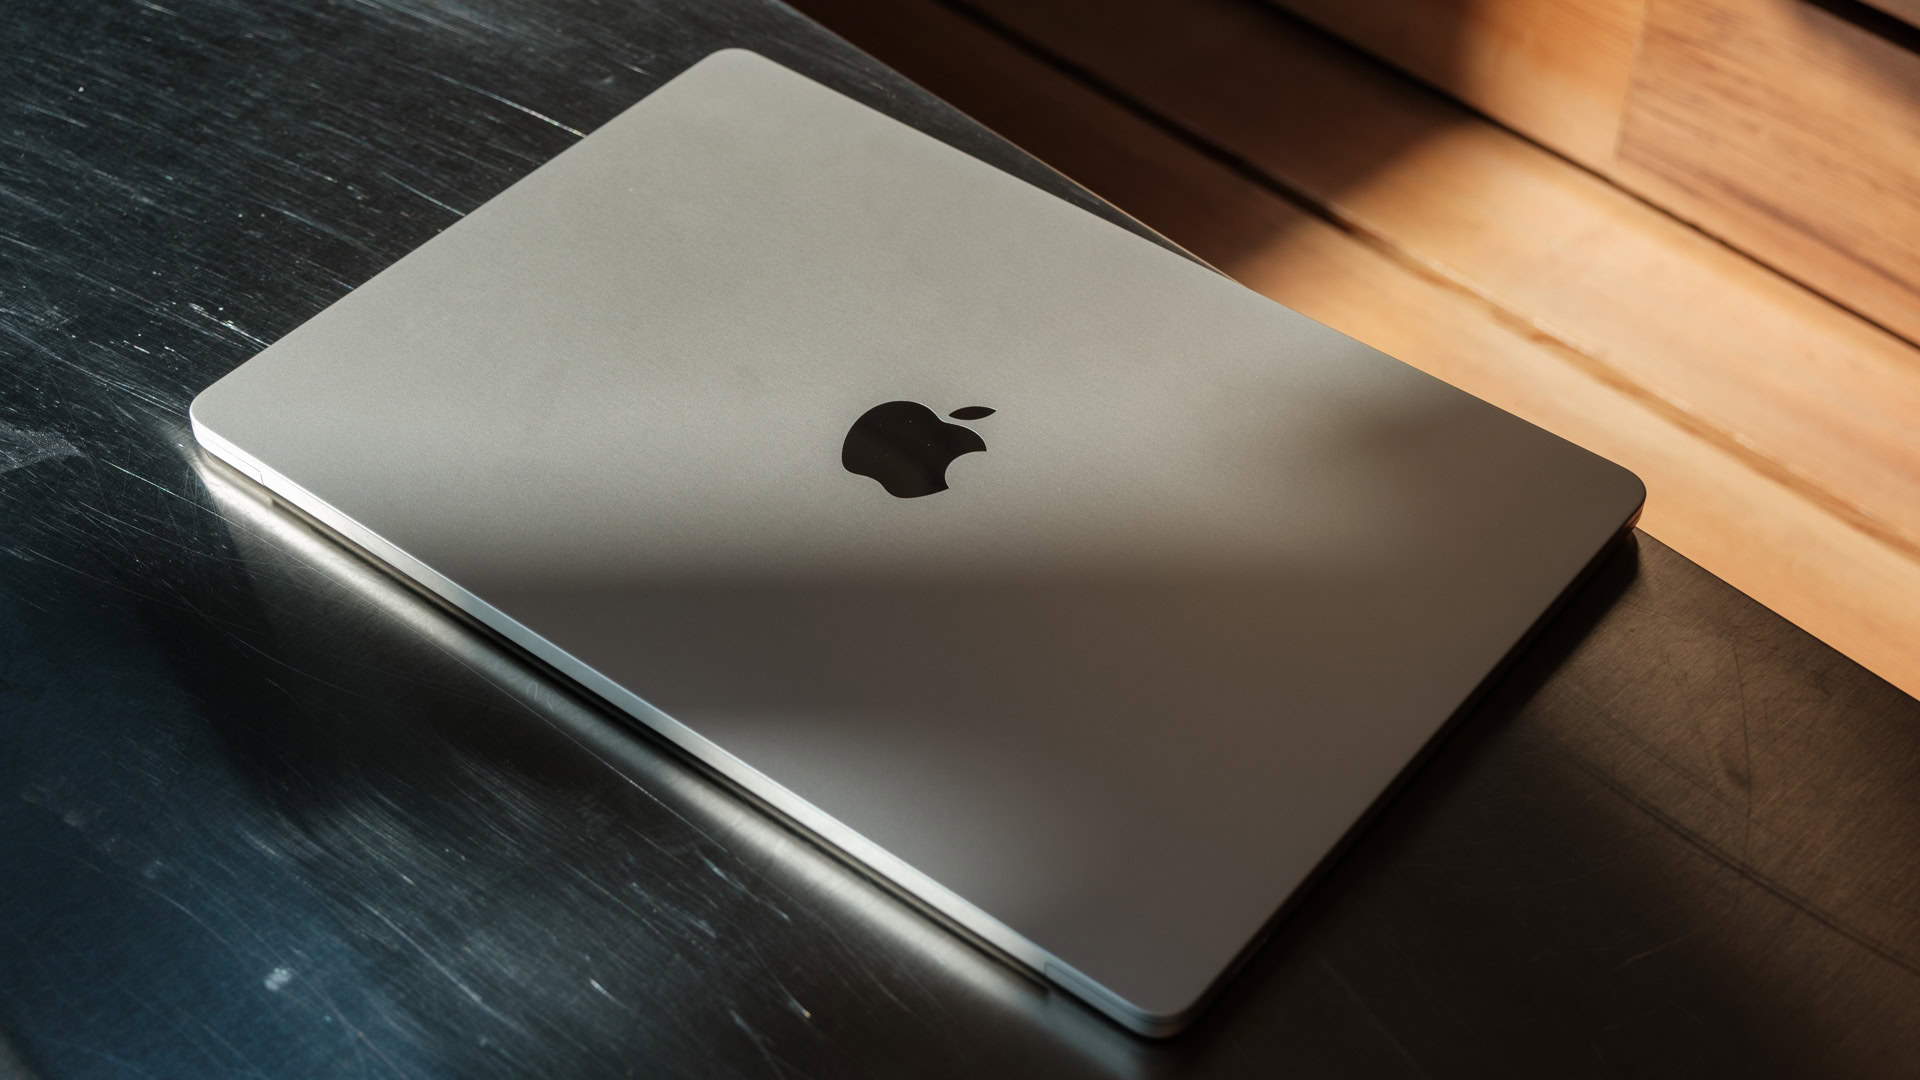 Apple could be working on an affordable MacBook to rival Chromebooks